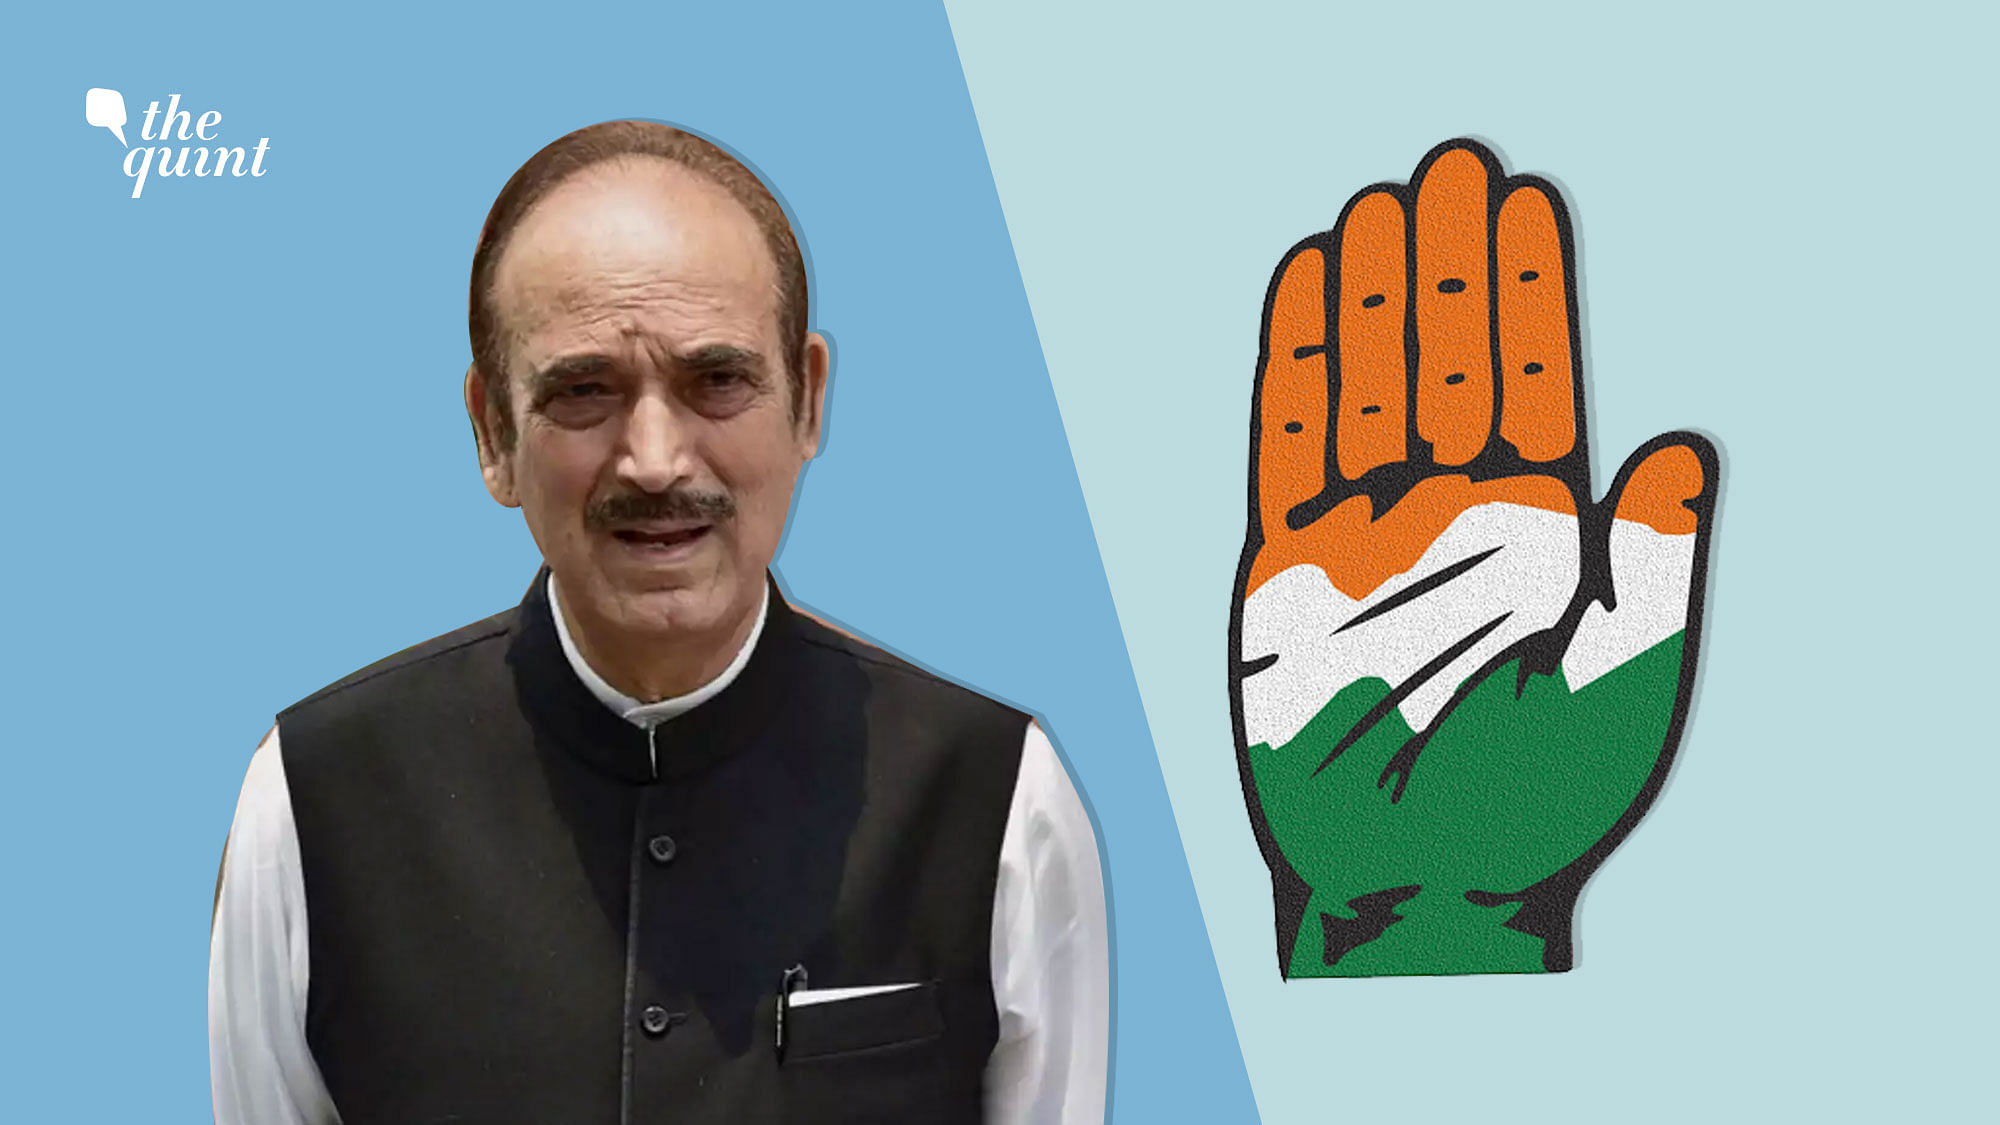 Azad is one of the 23-odd dissenting Congress leaders who have called for reforms in the party and have been dubbed “G-23”.